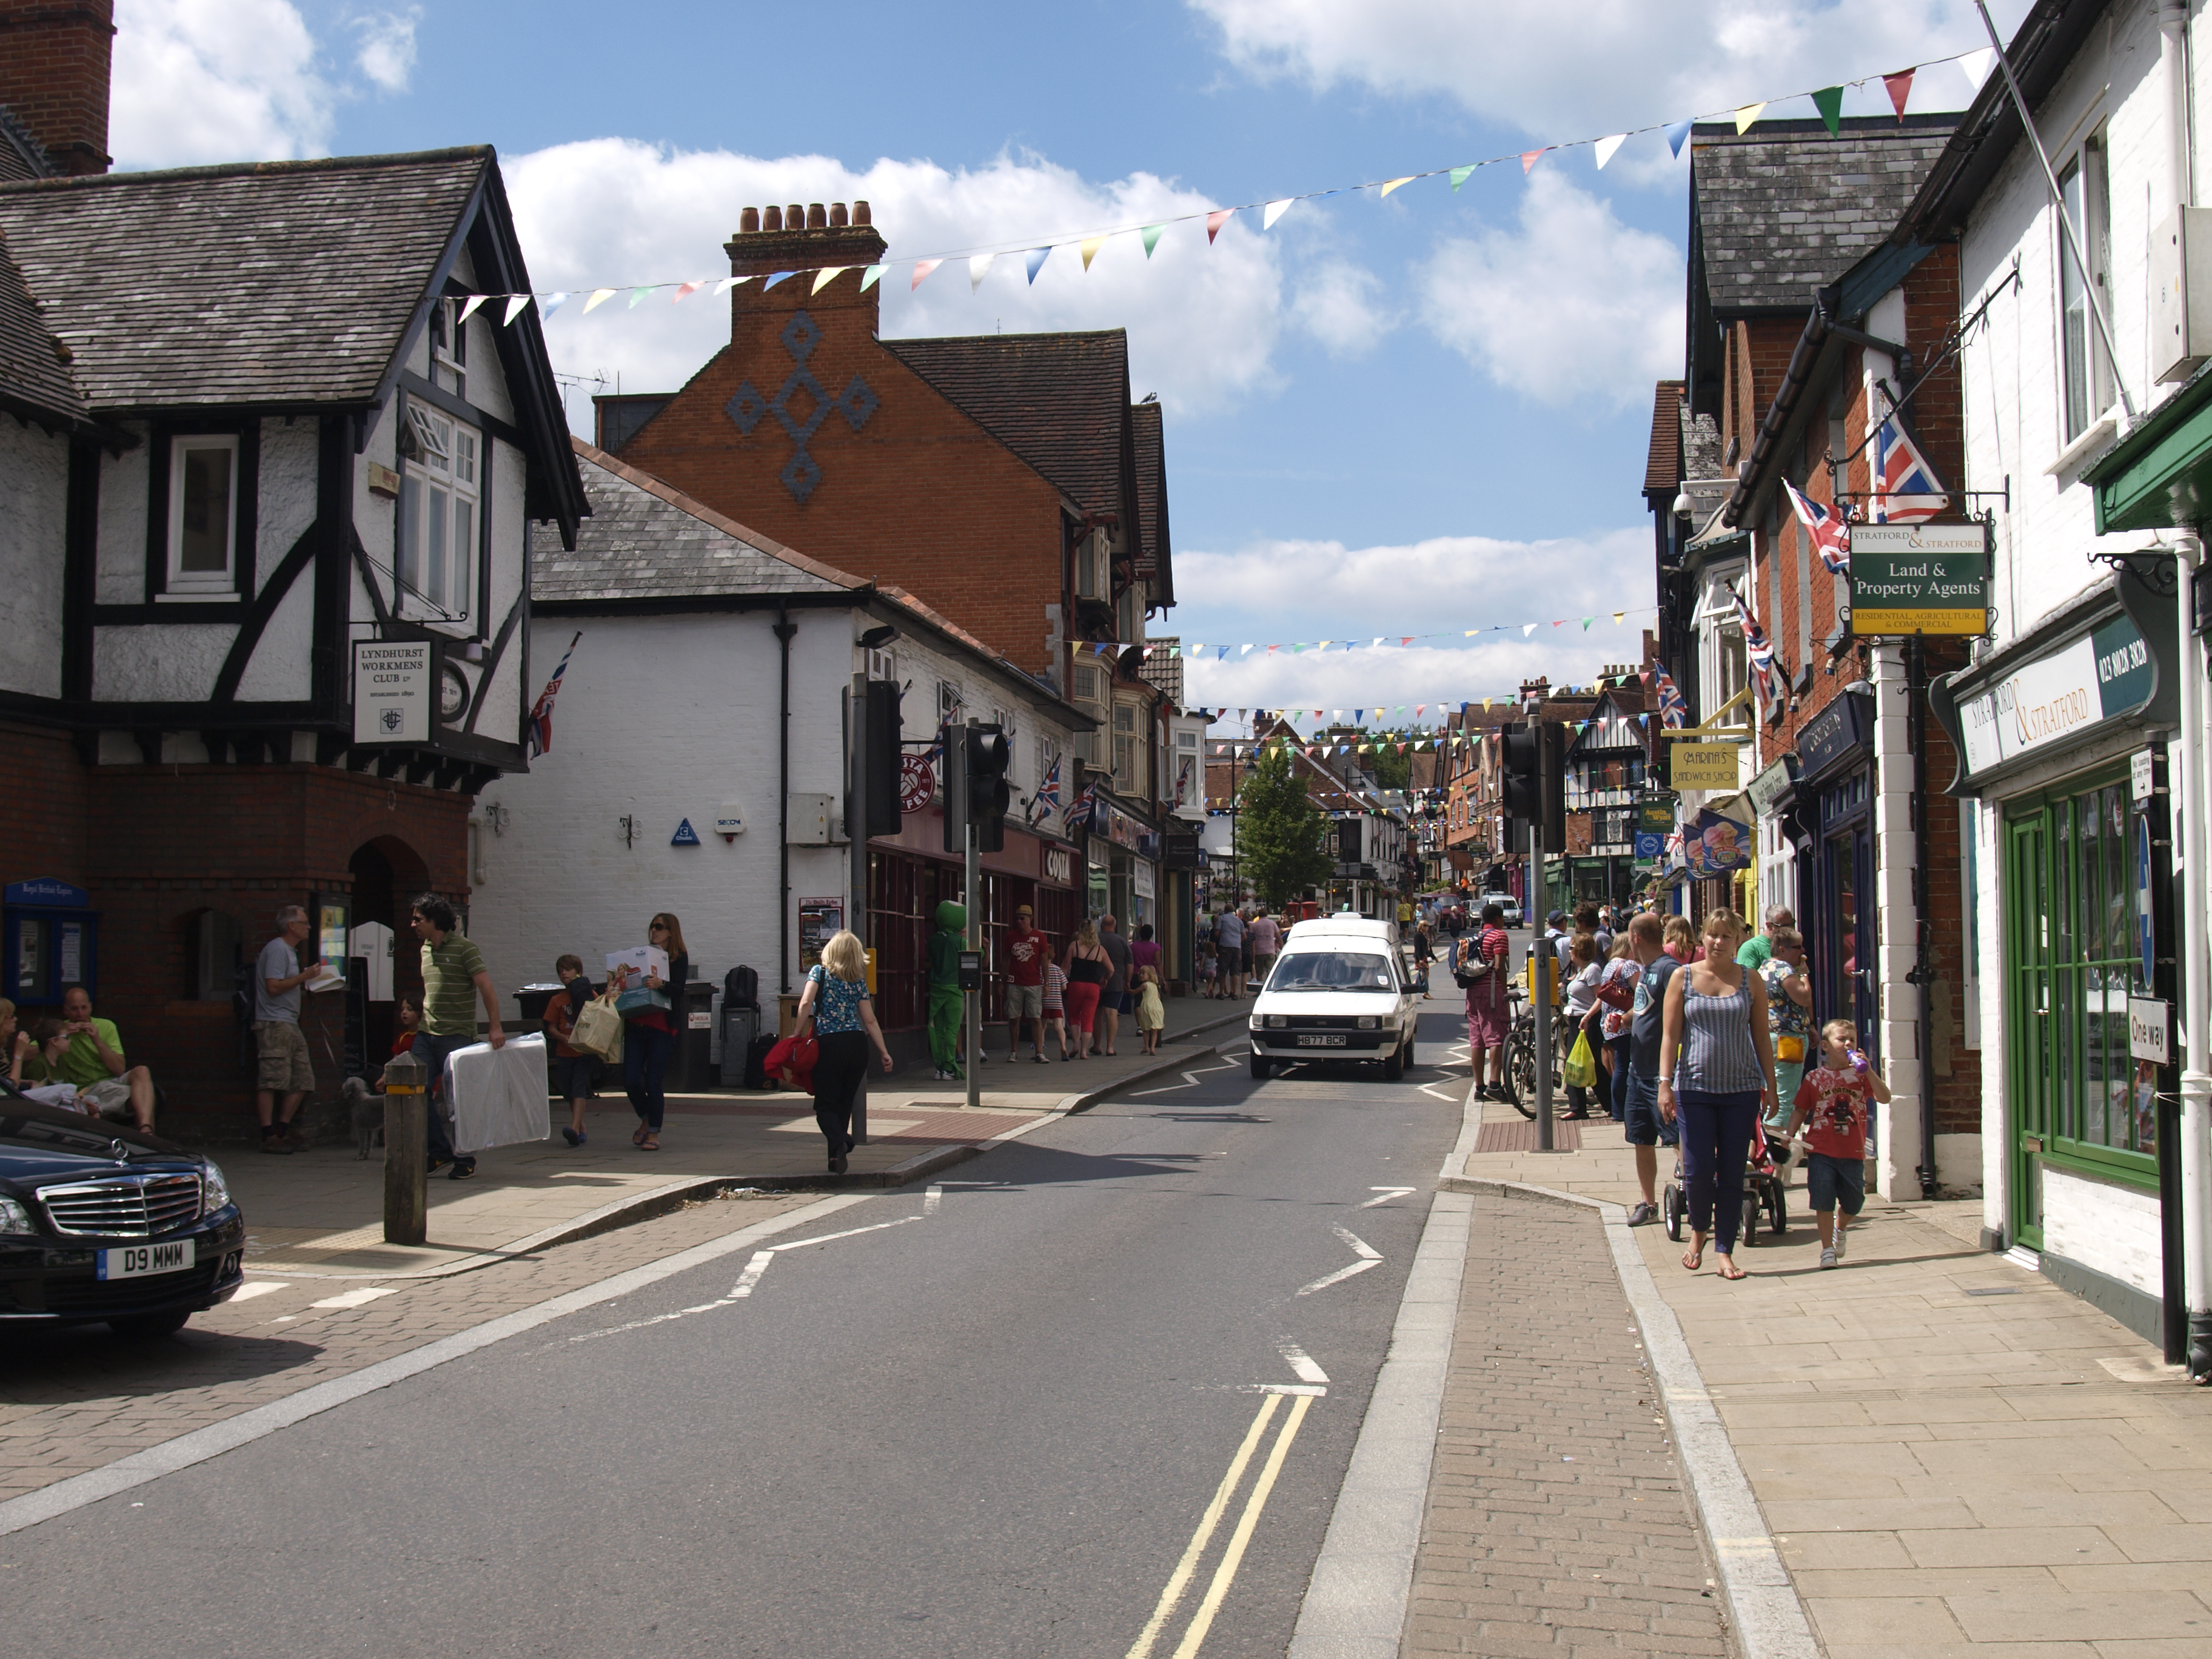 Lyndhurst High Street, New Forest (Photo by: Education Images/Universal Images Group via Getty Images)